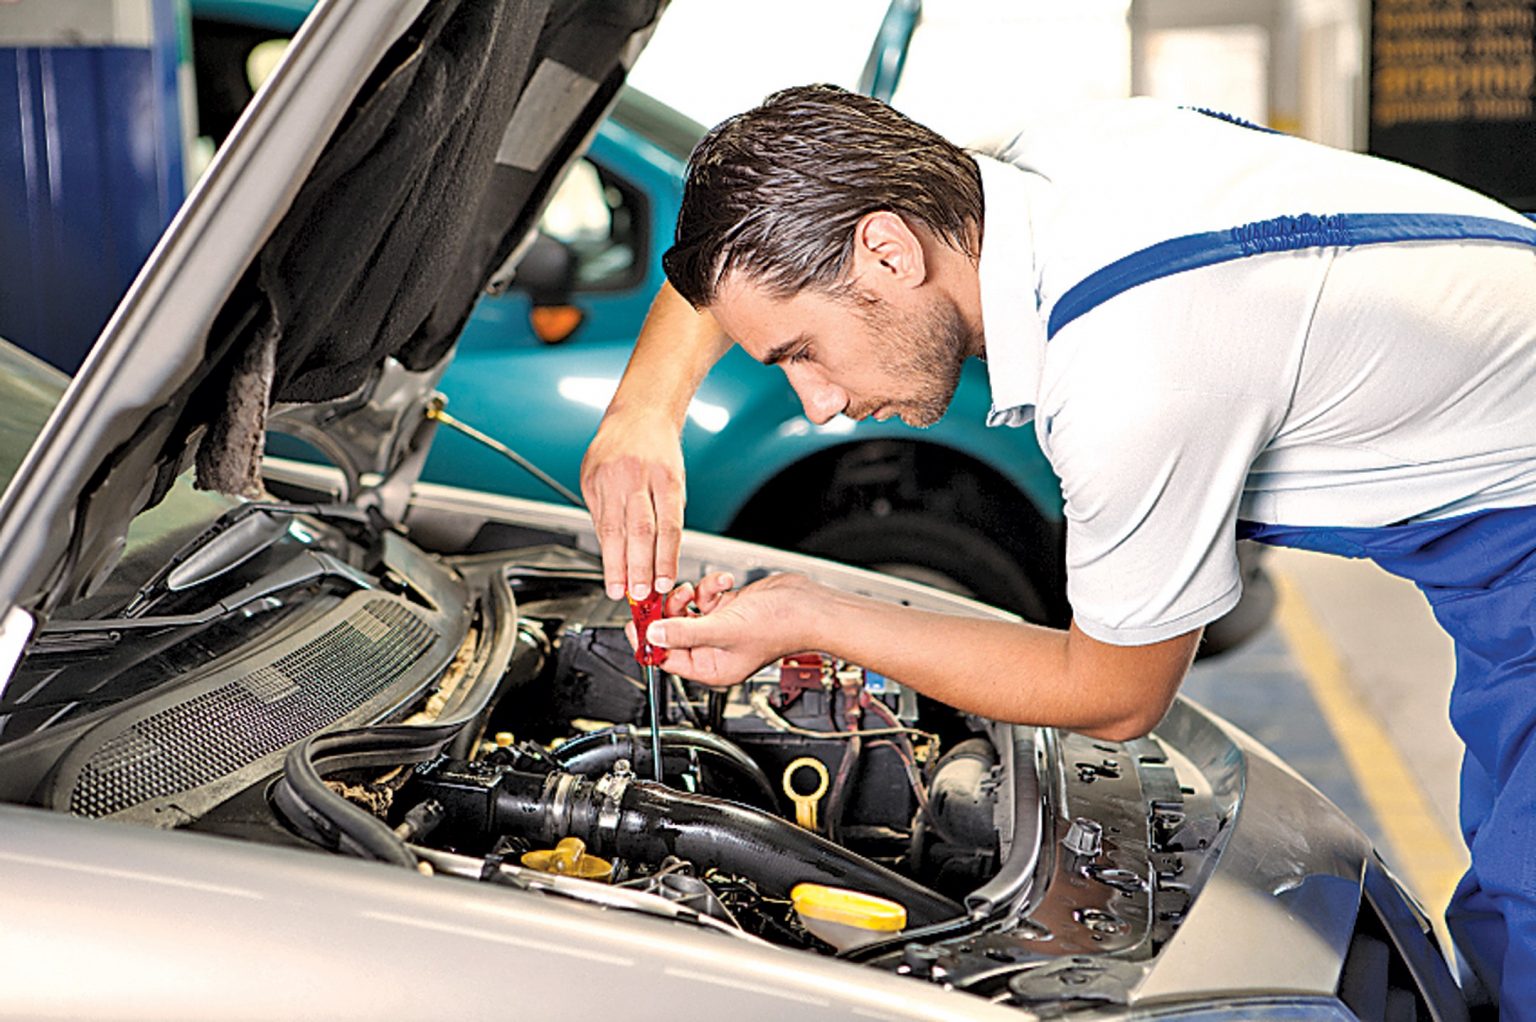 Mobile Auto Repair Service in Iowa City Towing Services of Iowa City